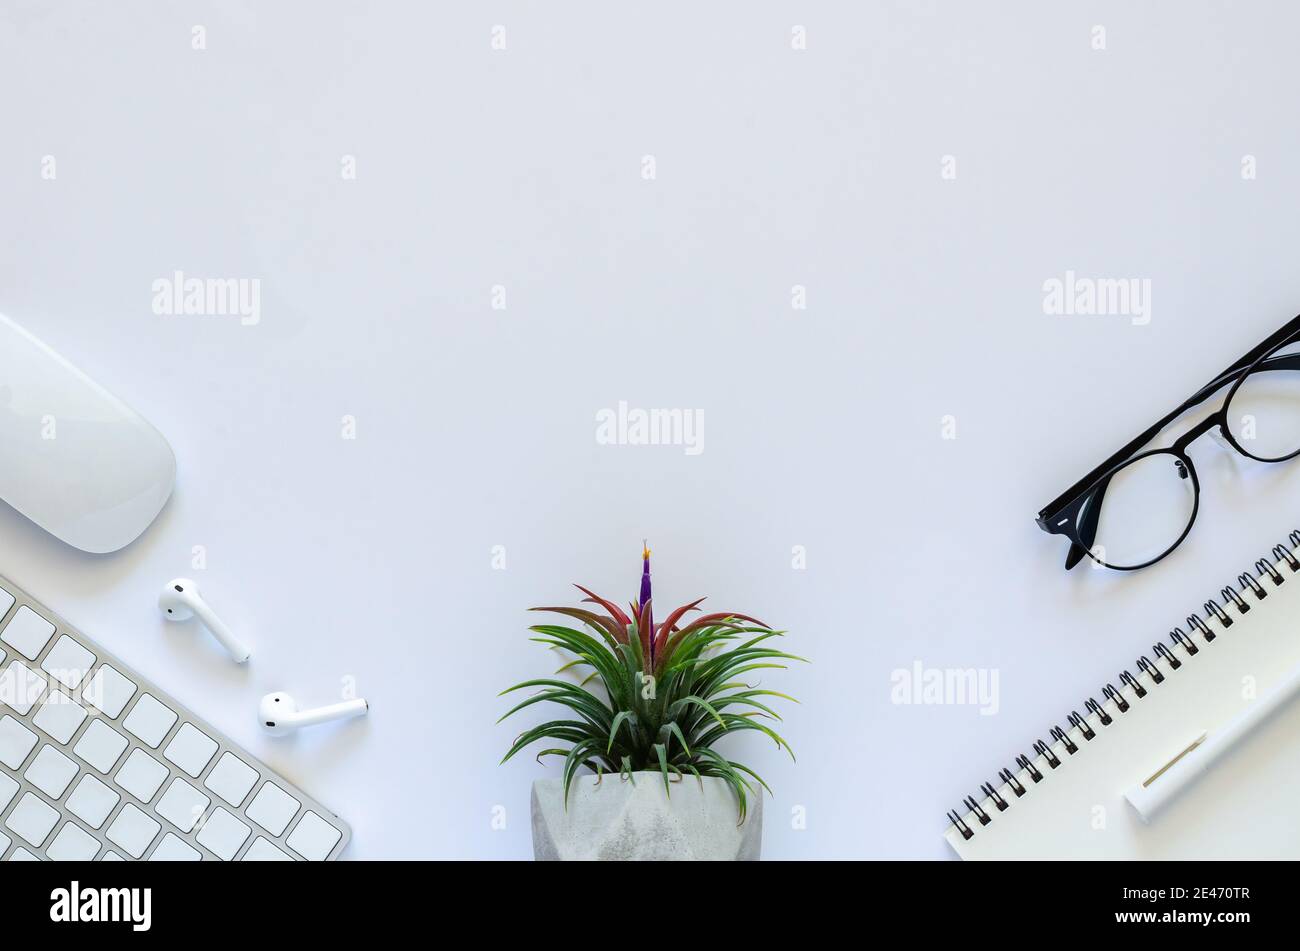 Background of work space concept with air plant Tillandsia, mouse, keyboard, earphone, notebook, pen and spectacles on white background. Stock Photo